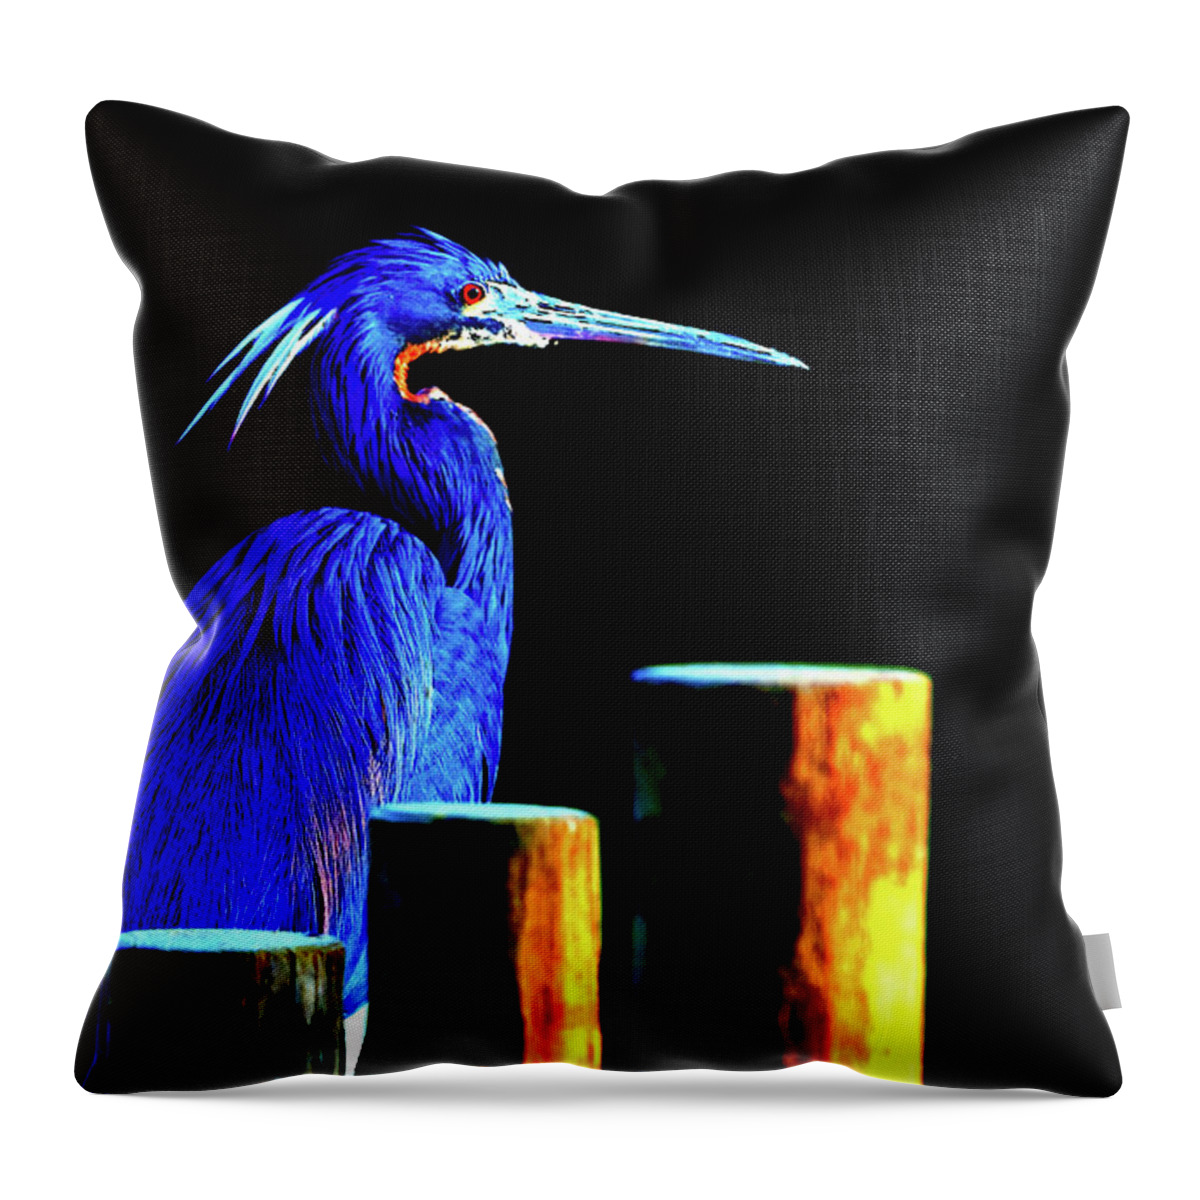 Wildlife Throw Pillow featuring the digital art Pensive Blue Heron by SnapHappy Photos